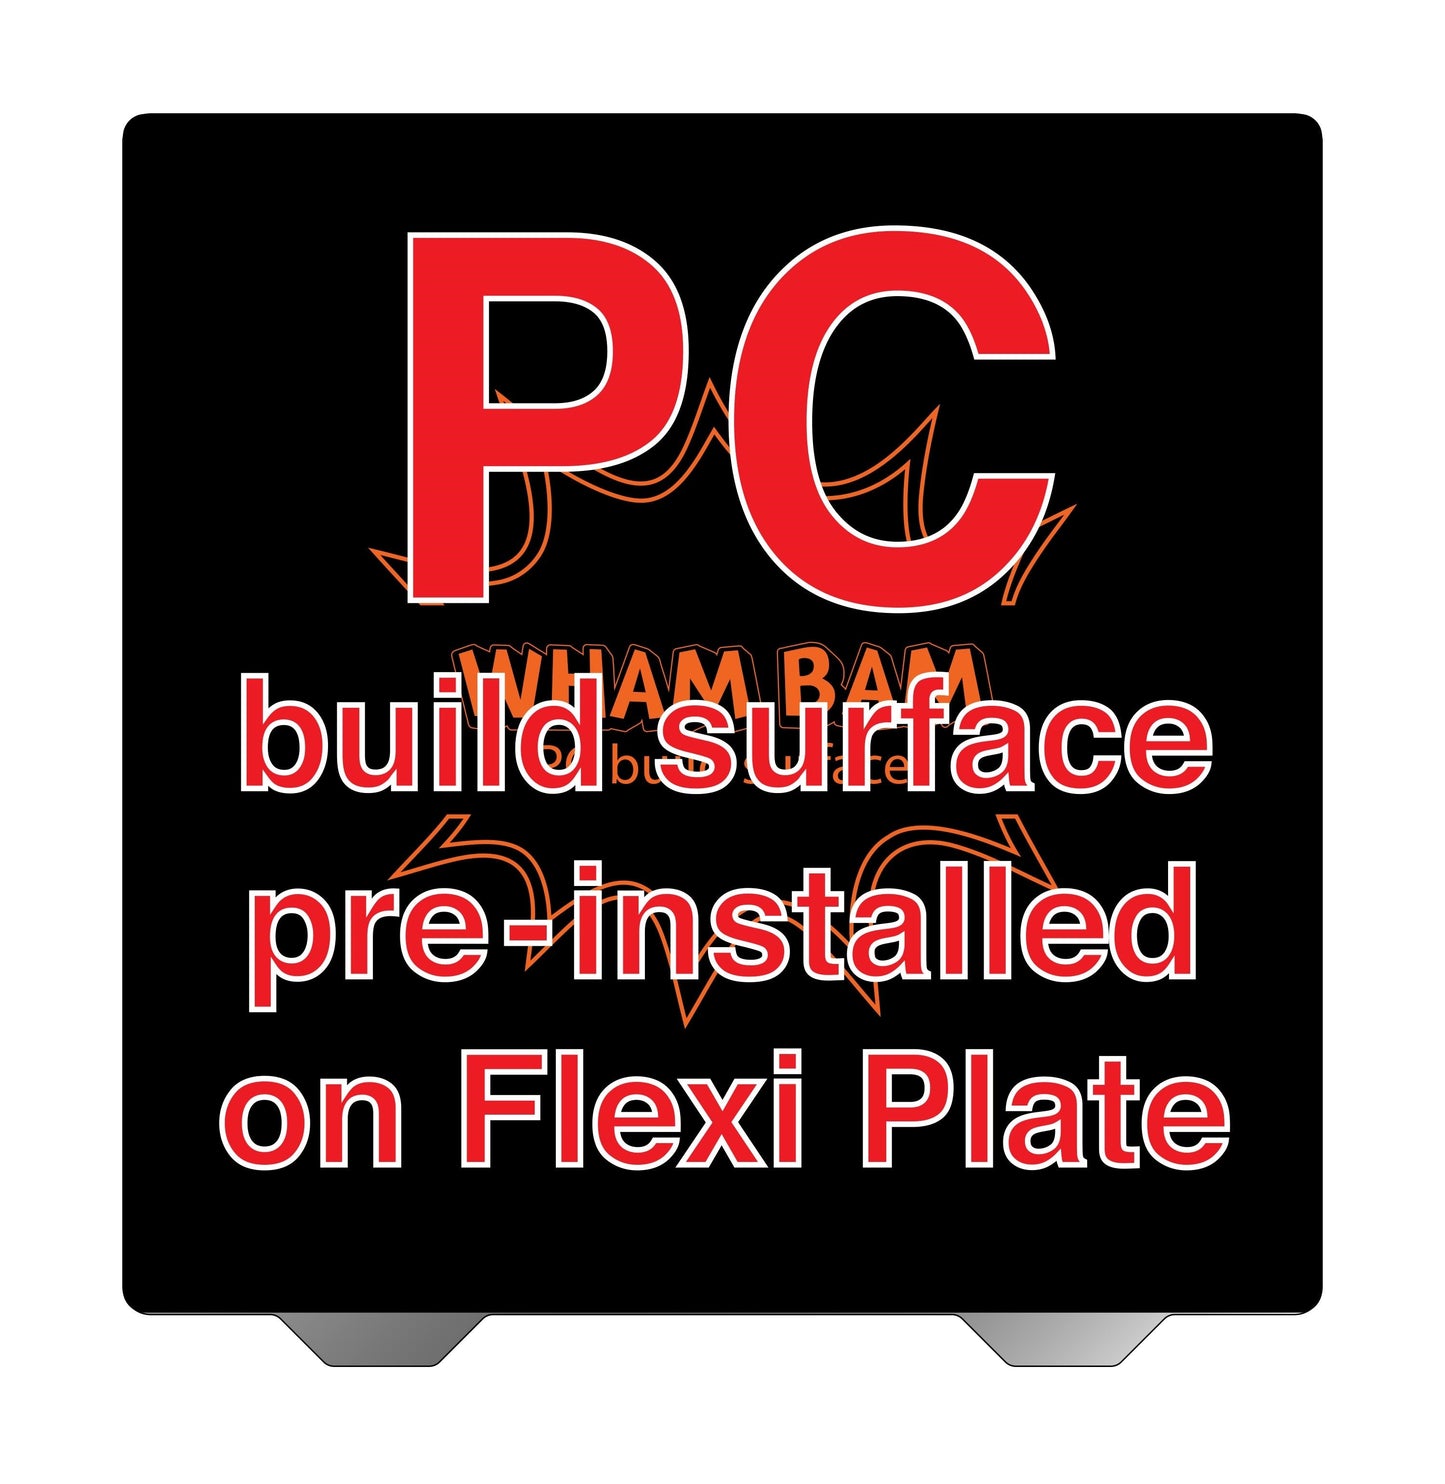 Flexi Plate with Pre-Installed PC Build Surface (Classic Black) - 430 x 420 - Creality CR-6 Max